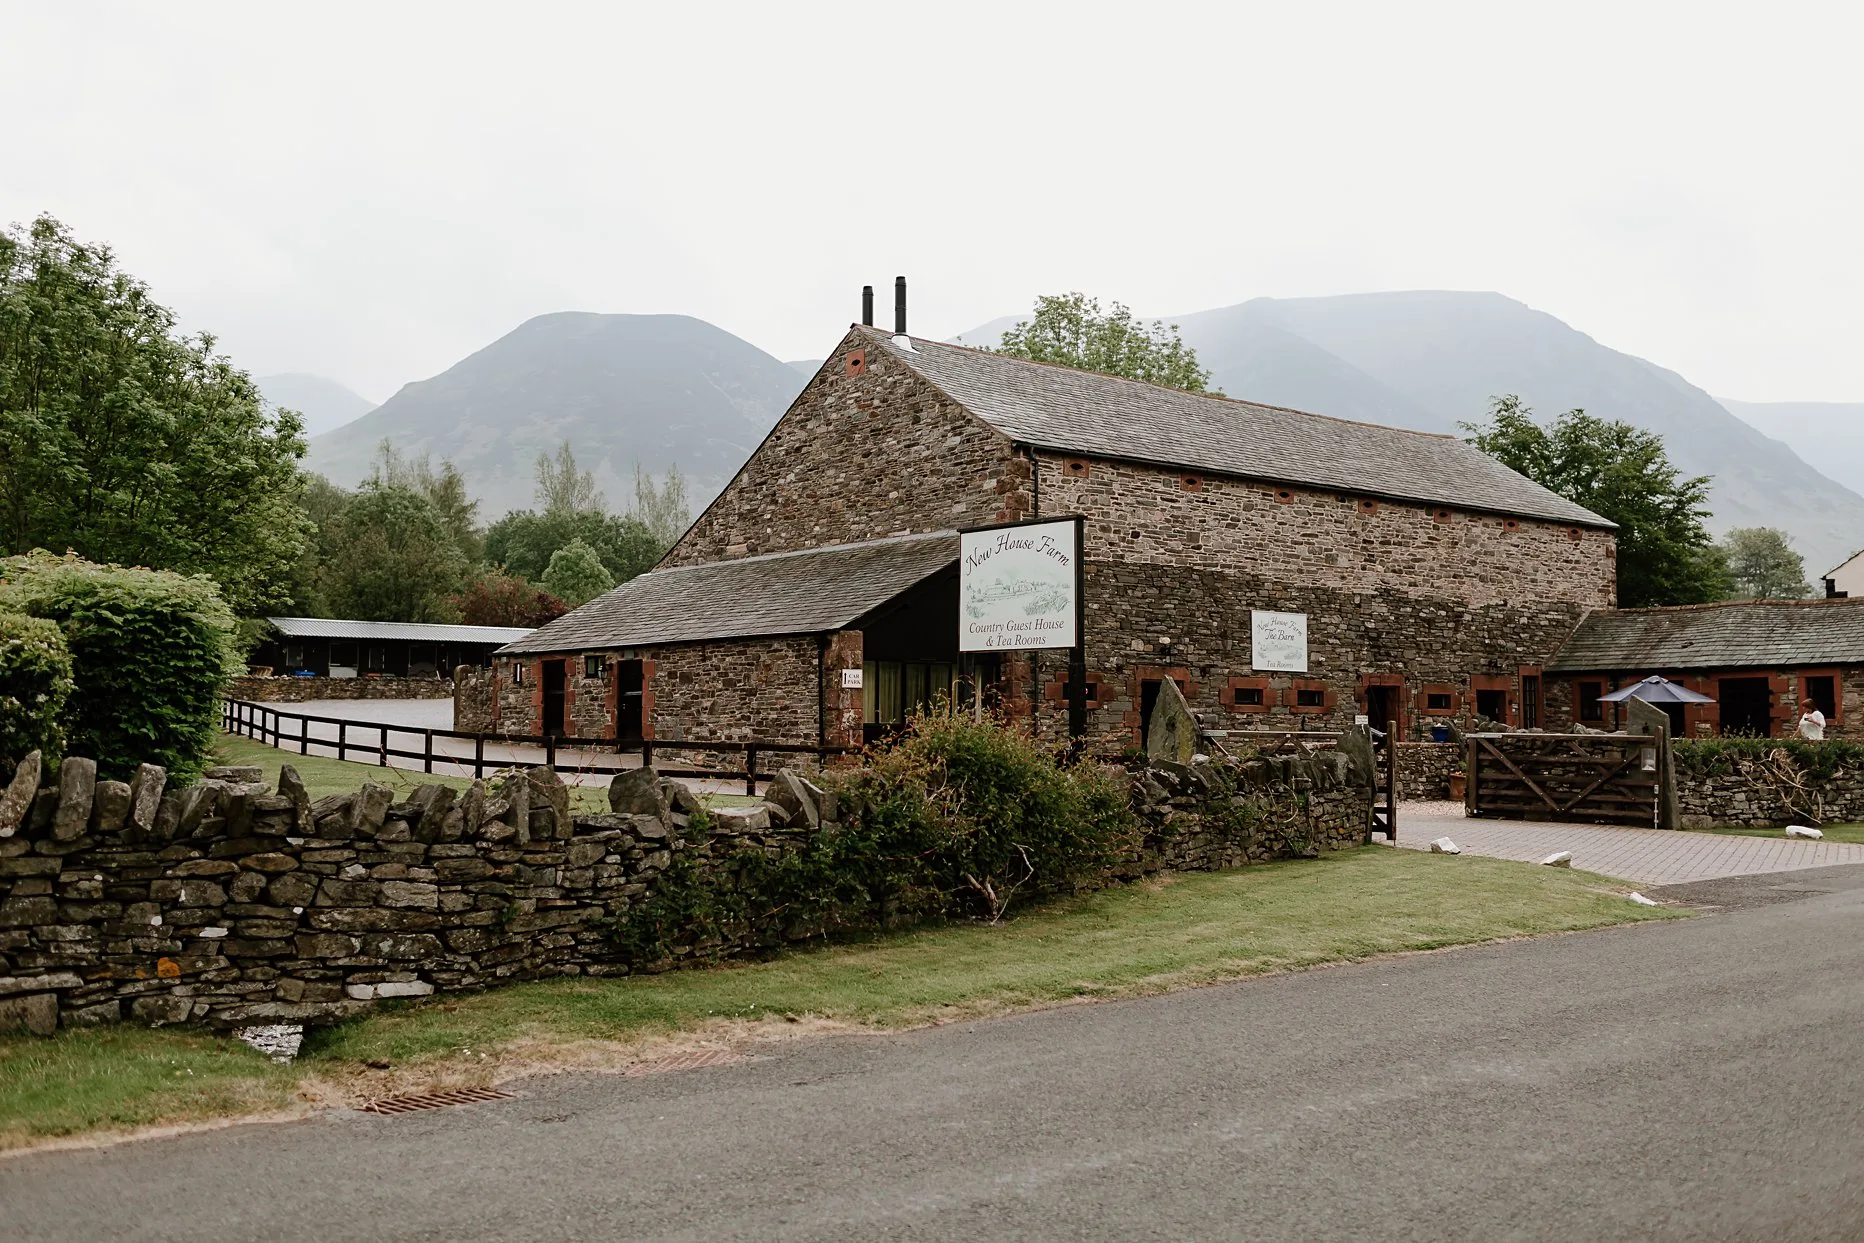 Exterior photograph of New House Farm in Lorton Valley, Lake District.